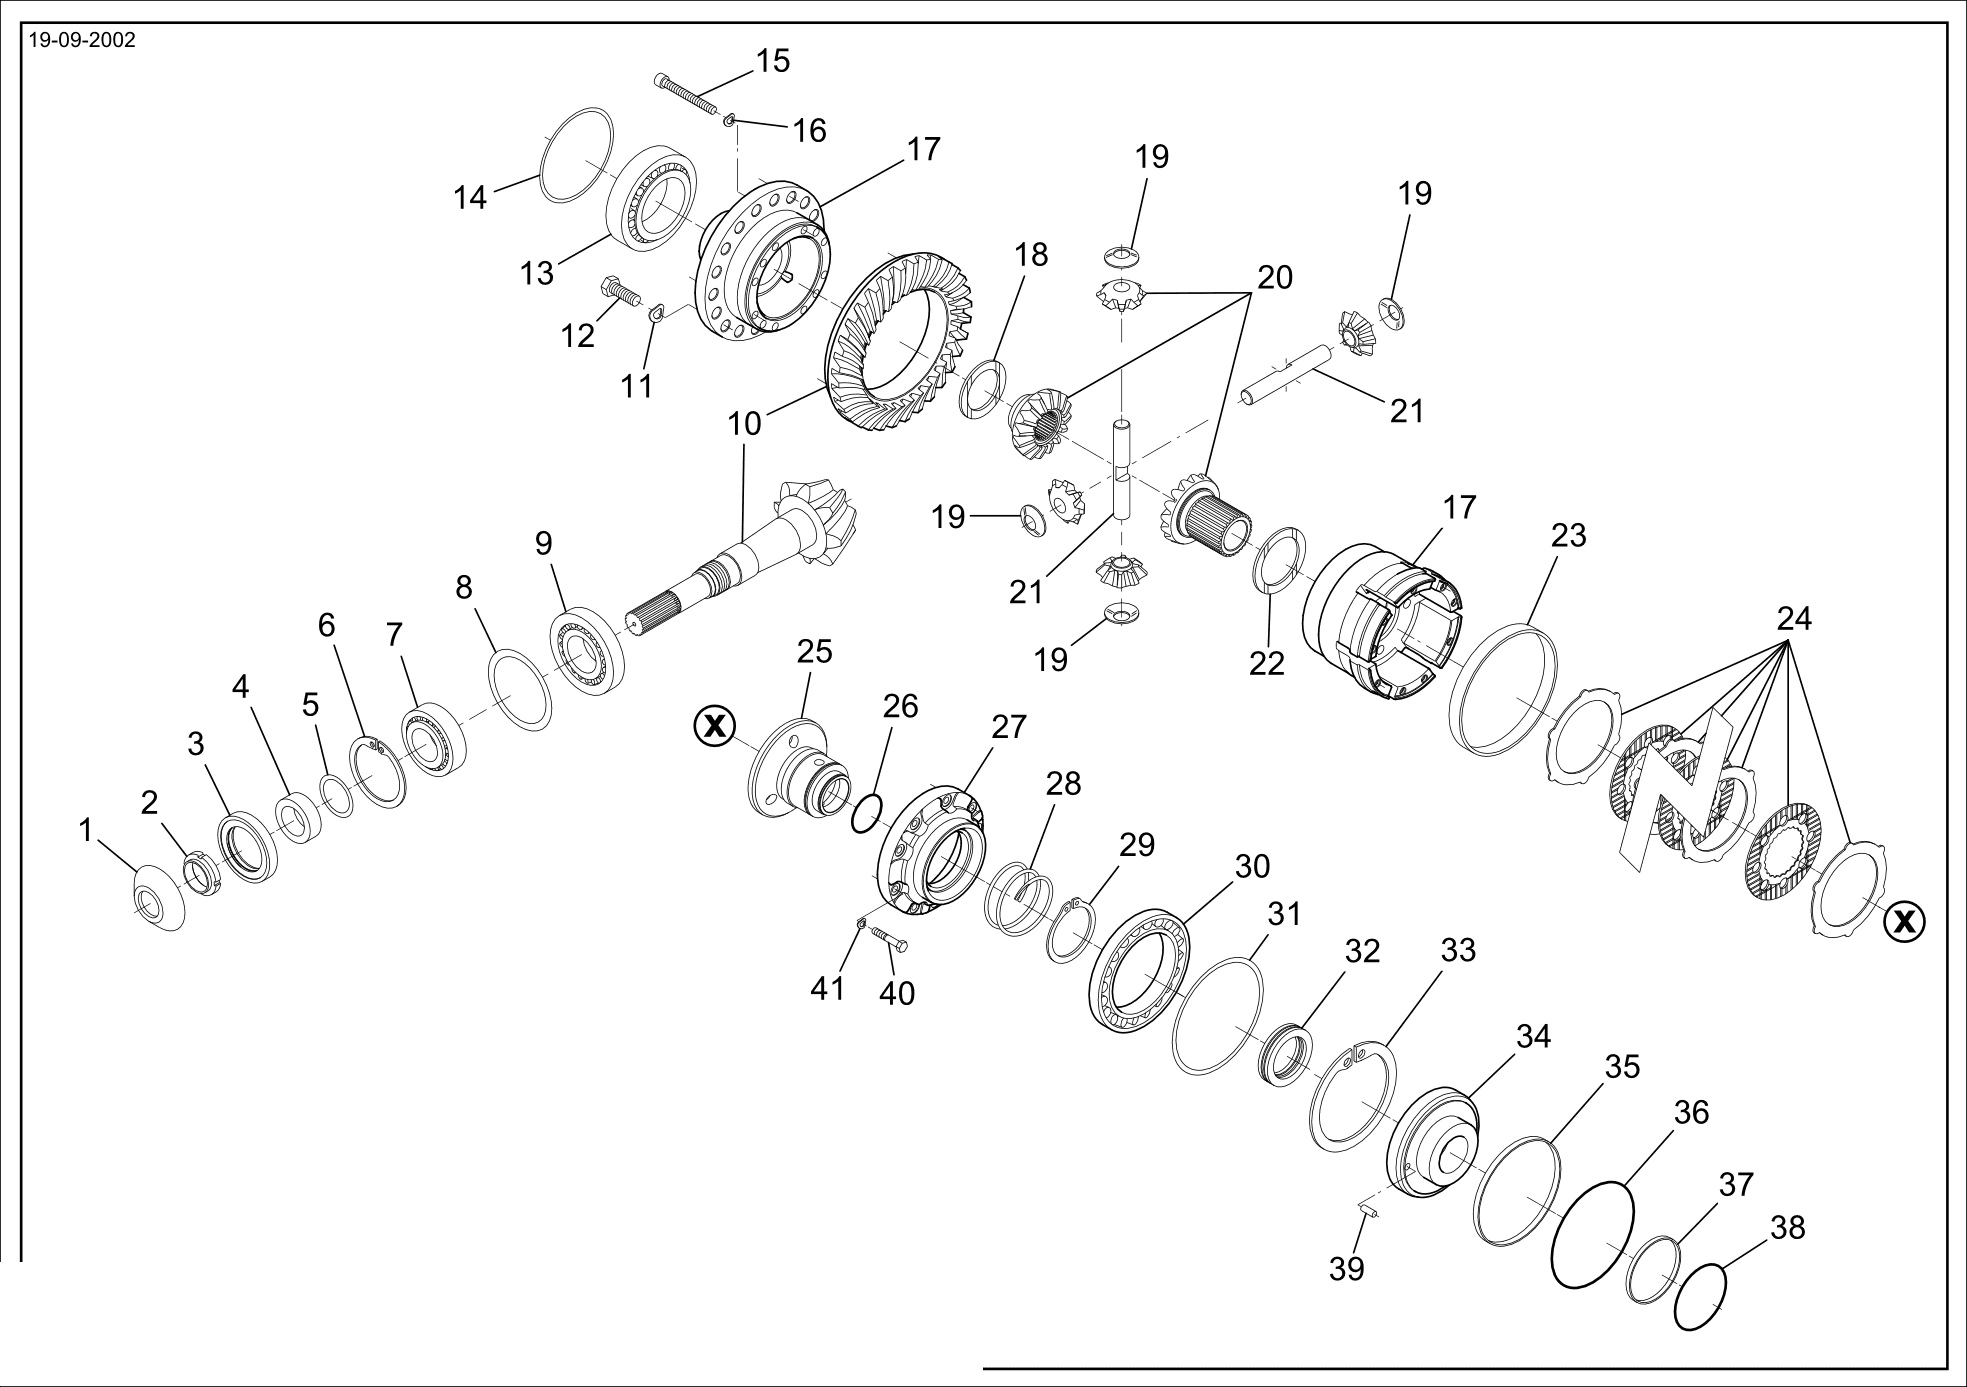 drawing for GHH 1202-0053 - BEARING (figure 5)